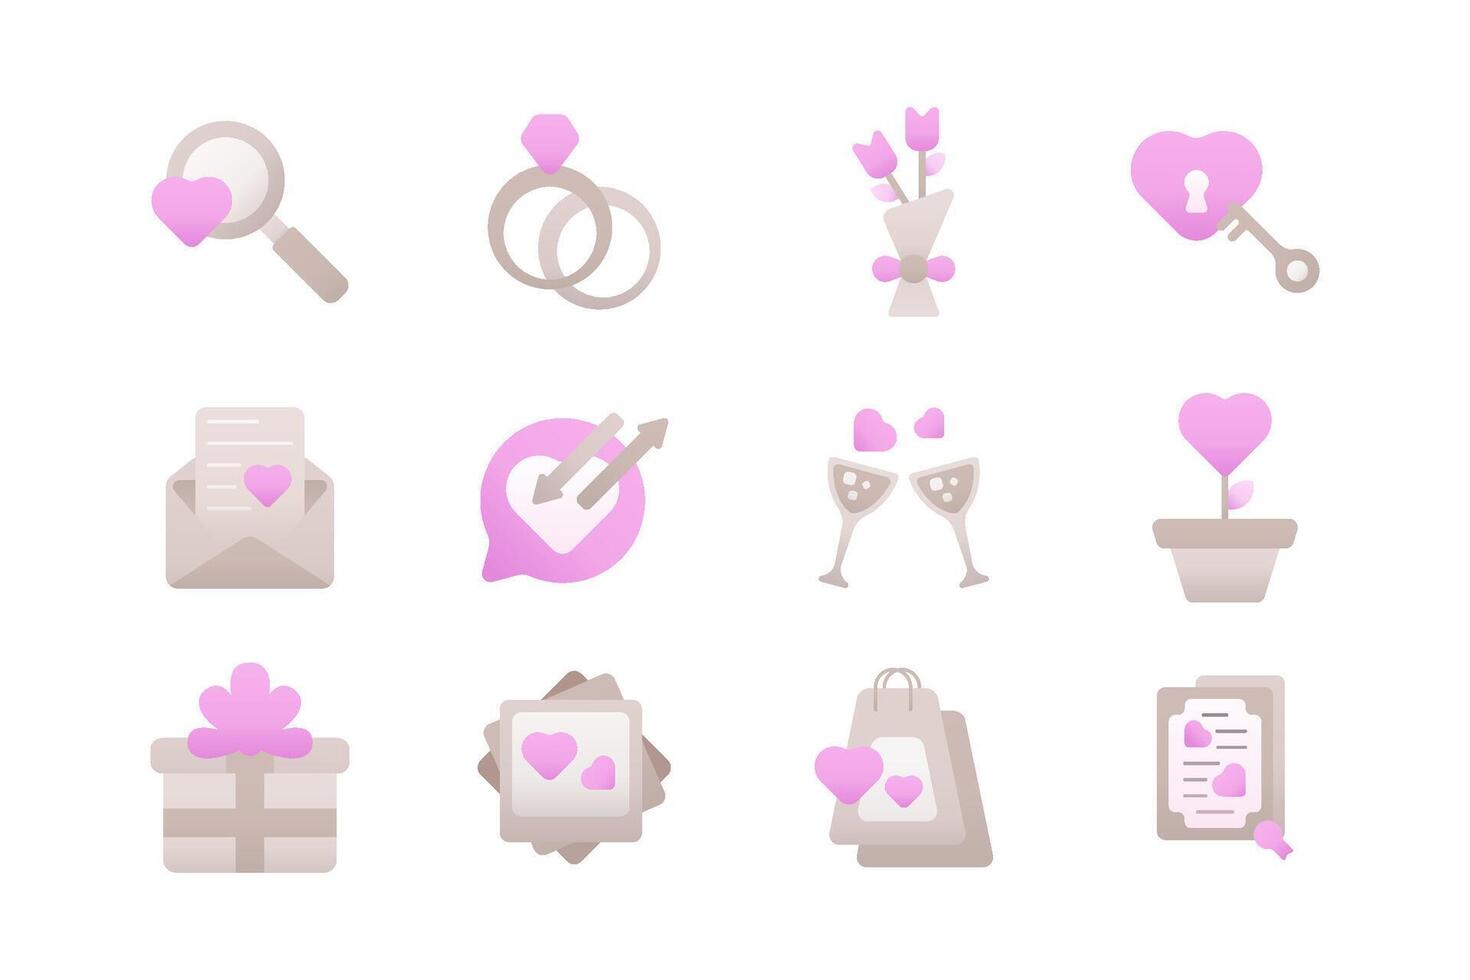 Dating and love icons vector